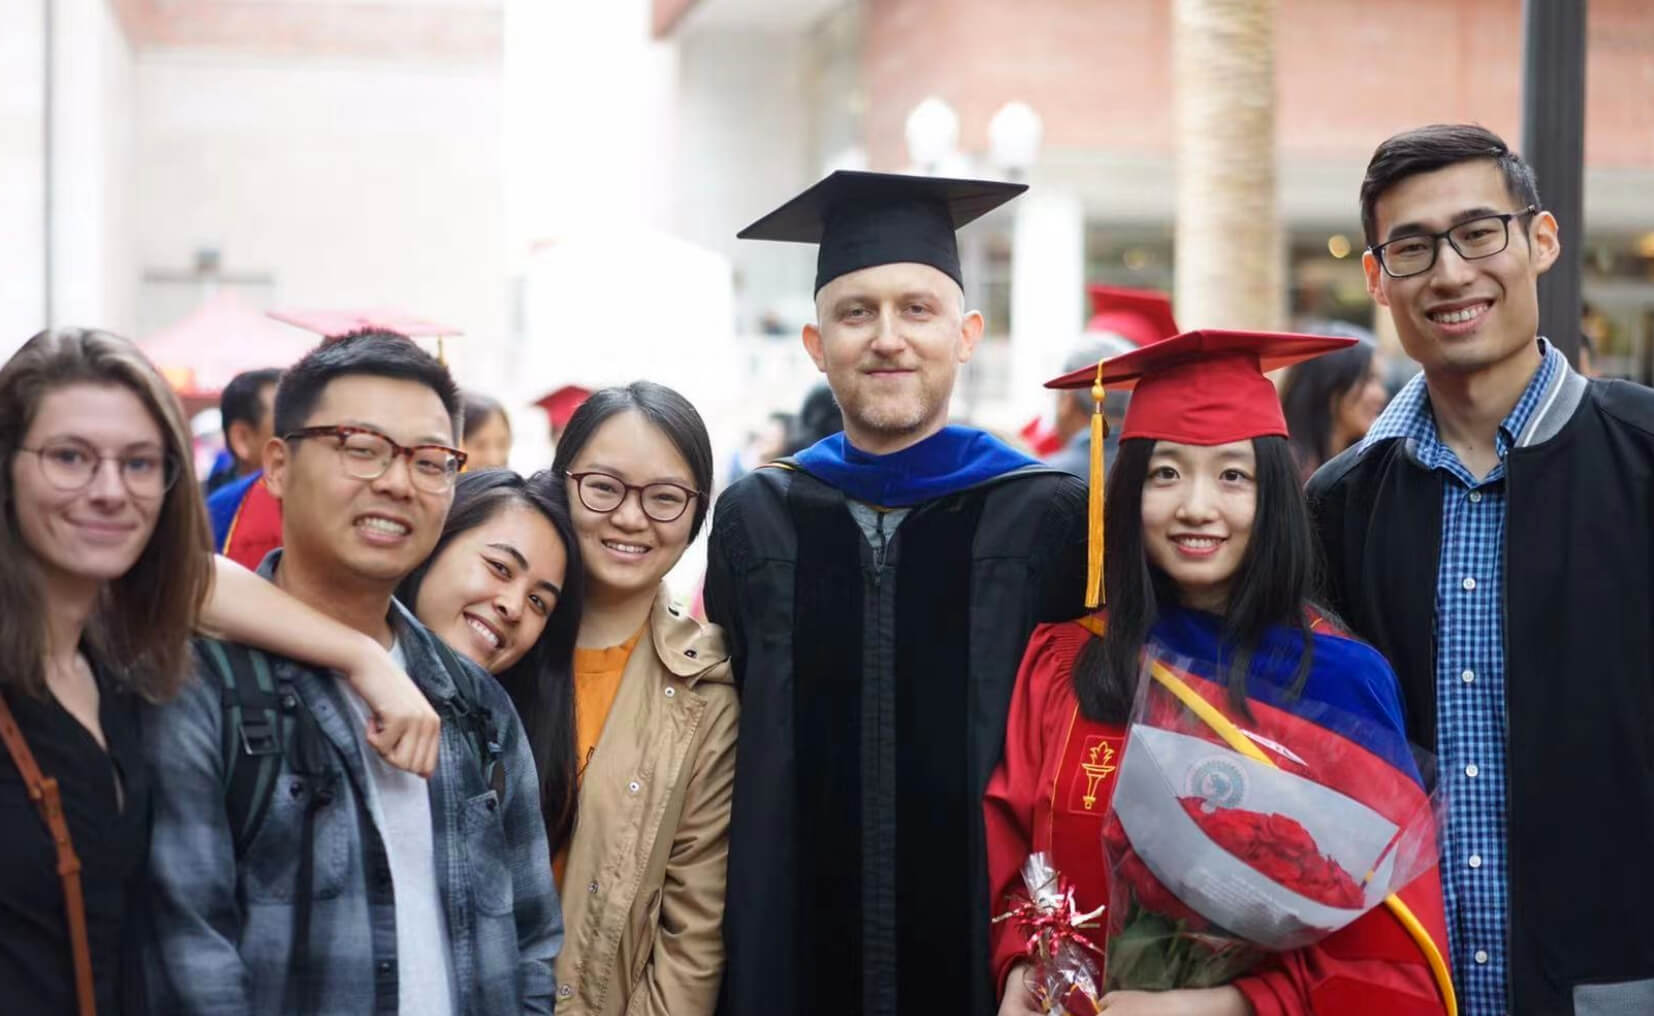 Professor George Ban-Weiss and some of his students (Photo/Courtesy of Trevor Krasowsky)